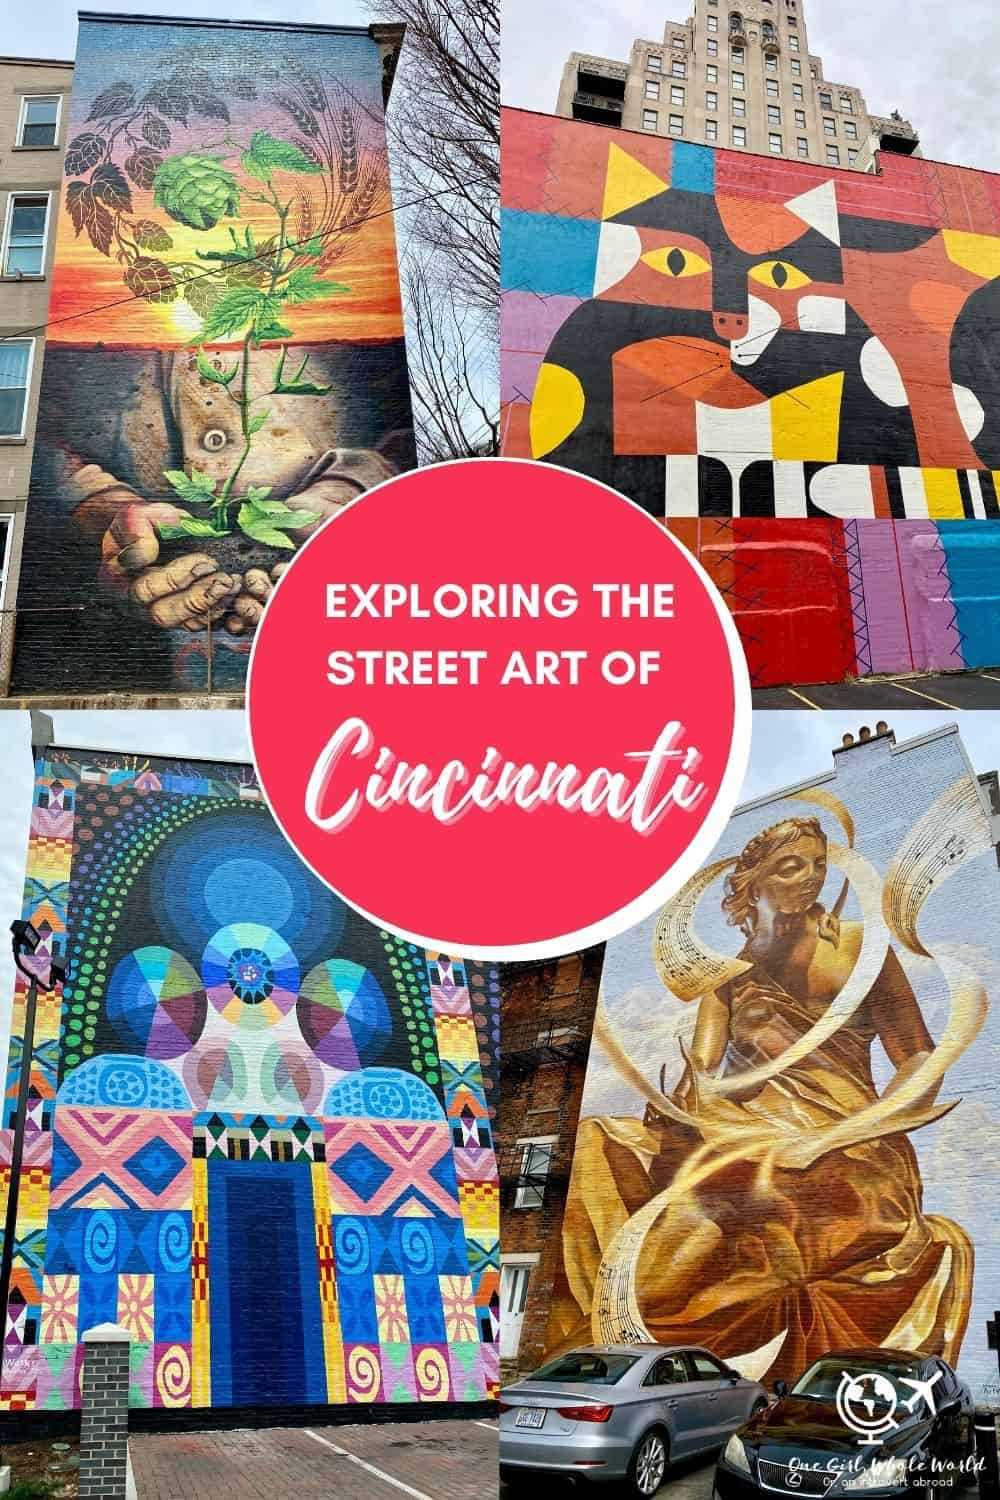 Painting the City: The Journey of Mural Artists